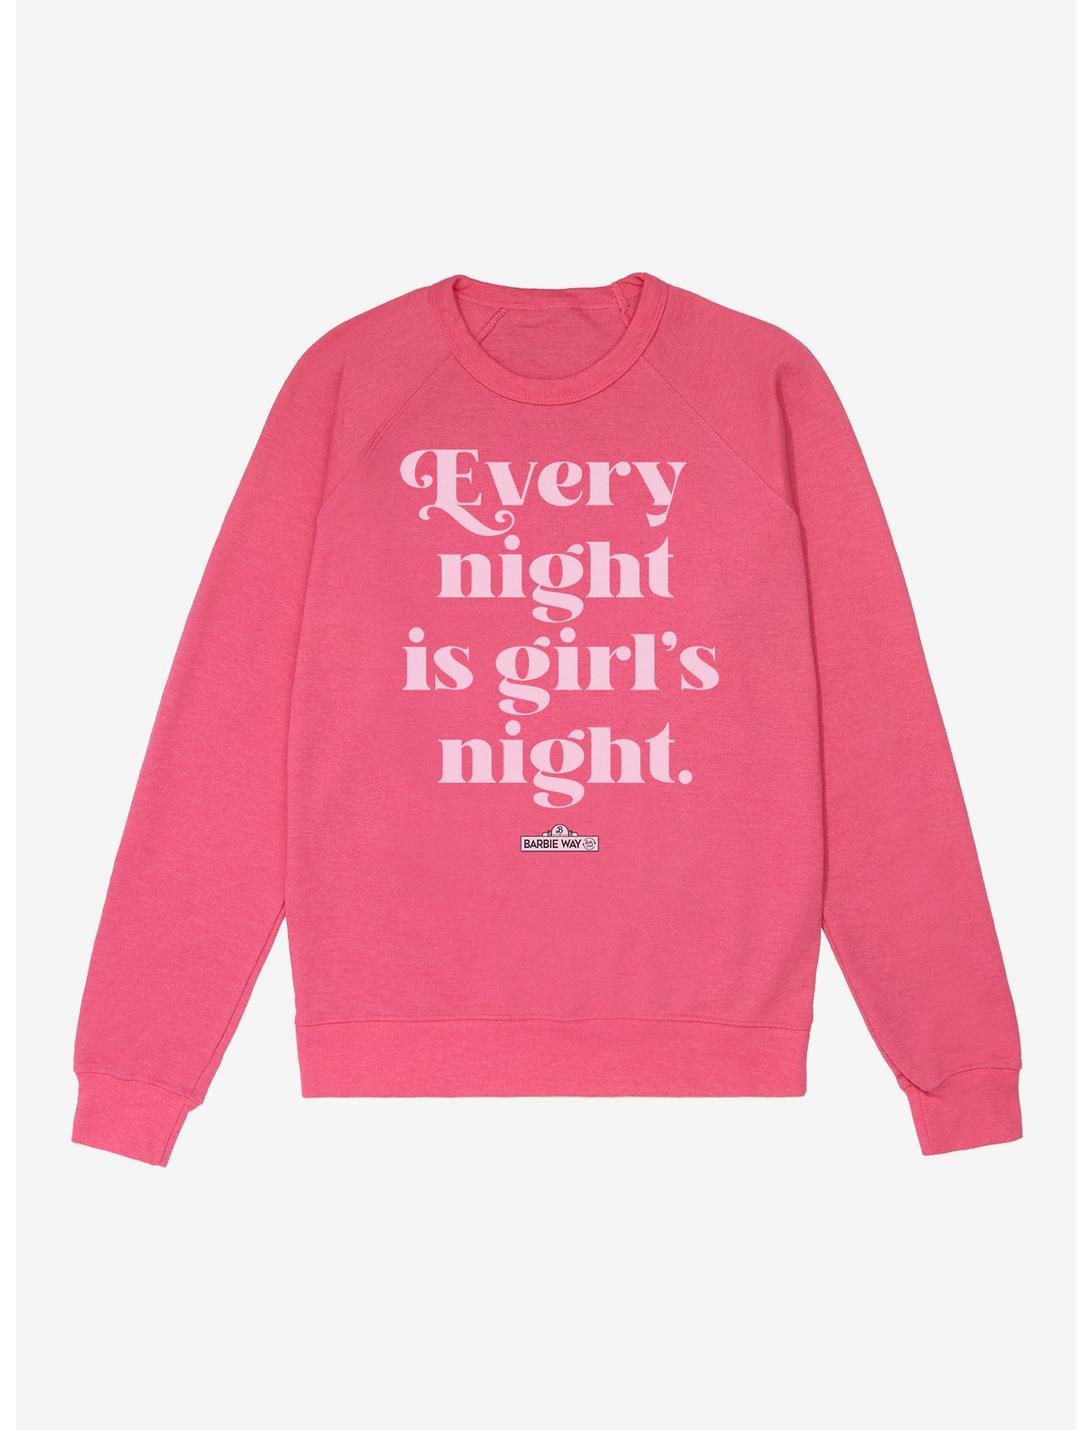 Barbie Girl's Night French Terry Sweatshirt, HELICONIA HEATHER, hi-res